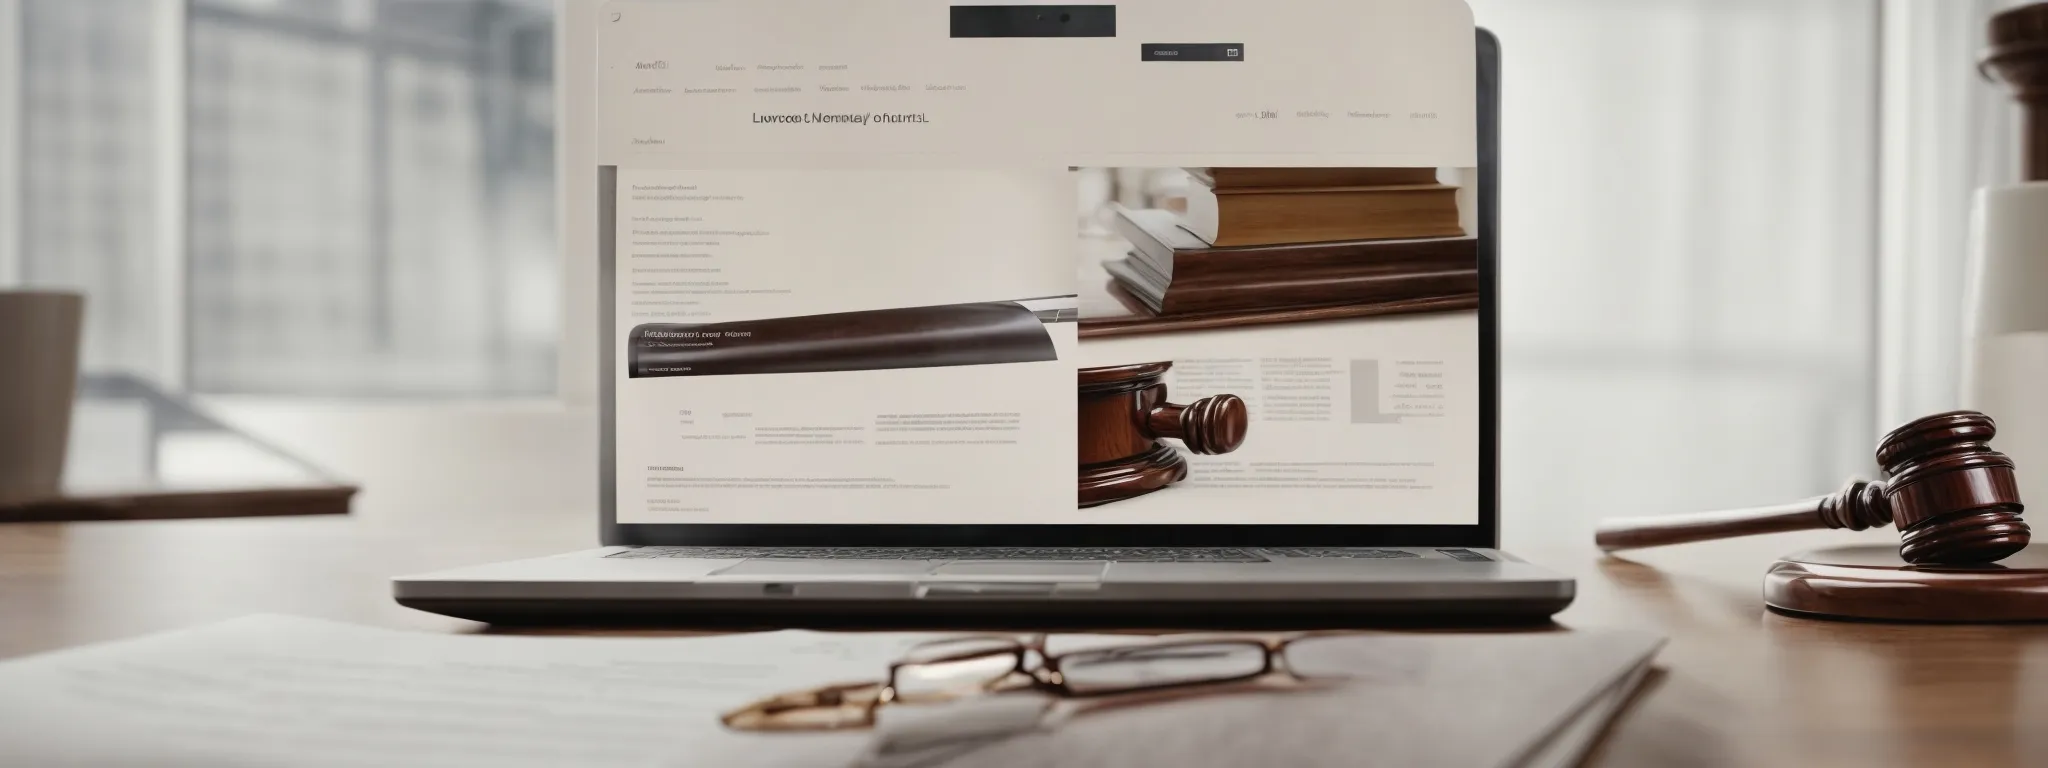 a laptop with legal documents on the screen and a gavel beside it suggests strategies for optimizing a law firm's online presence.